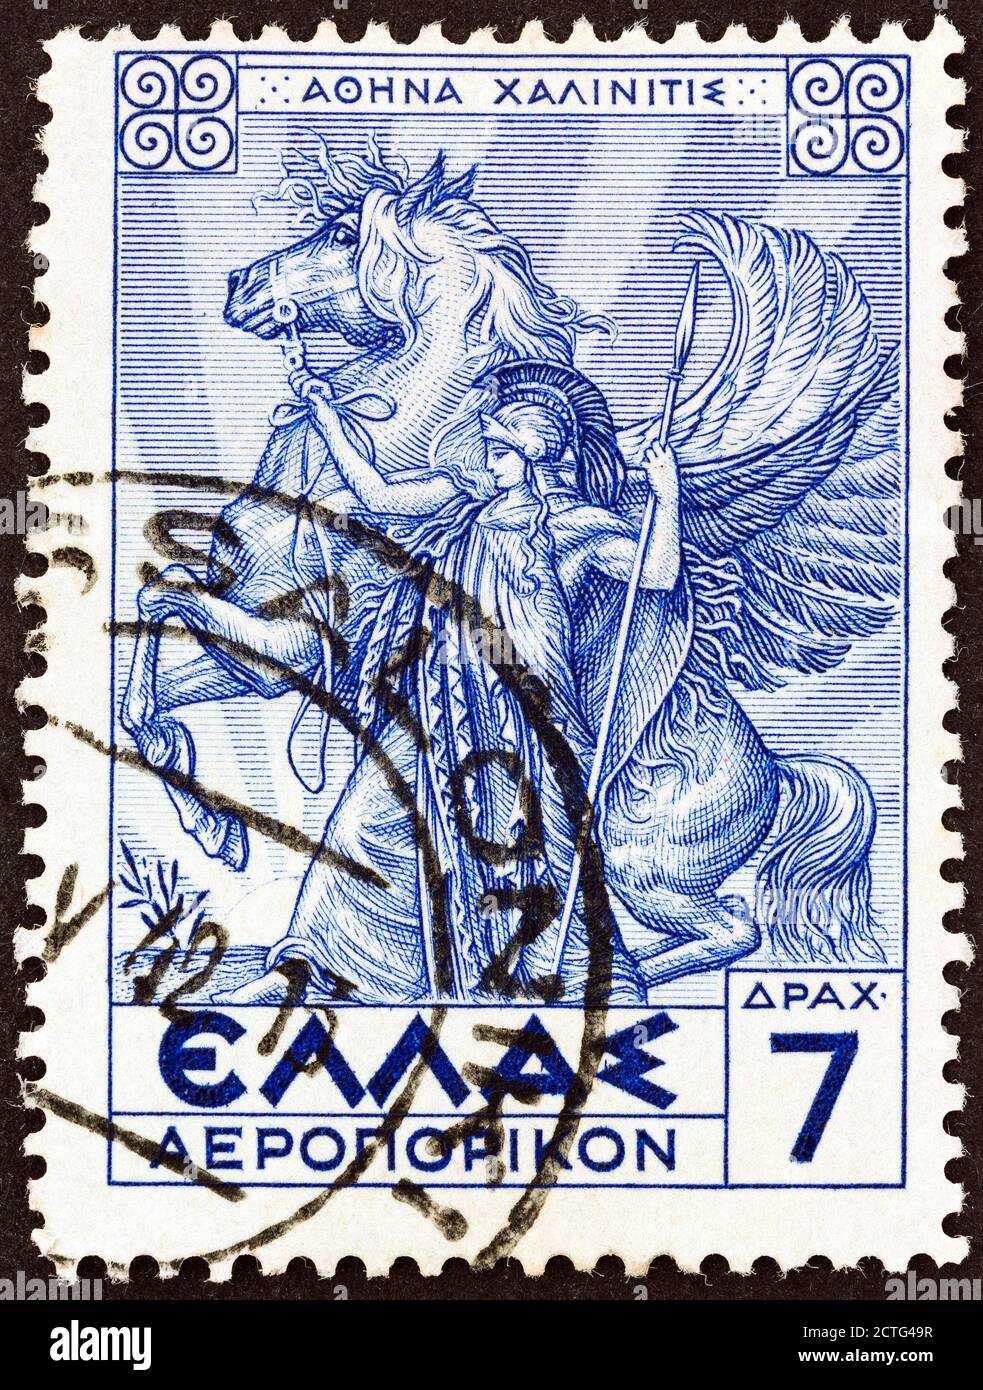 GREECE - CIRCA 1935: A stamp printed in Greece from the 'Airmail - Greek Mythology' issue shows goddess Athena, circa 1935. Stock Photo